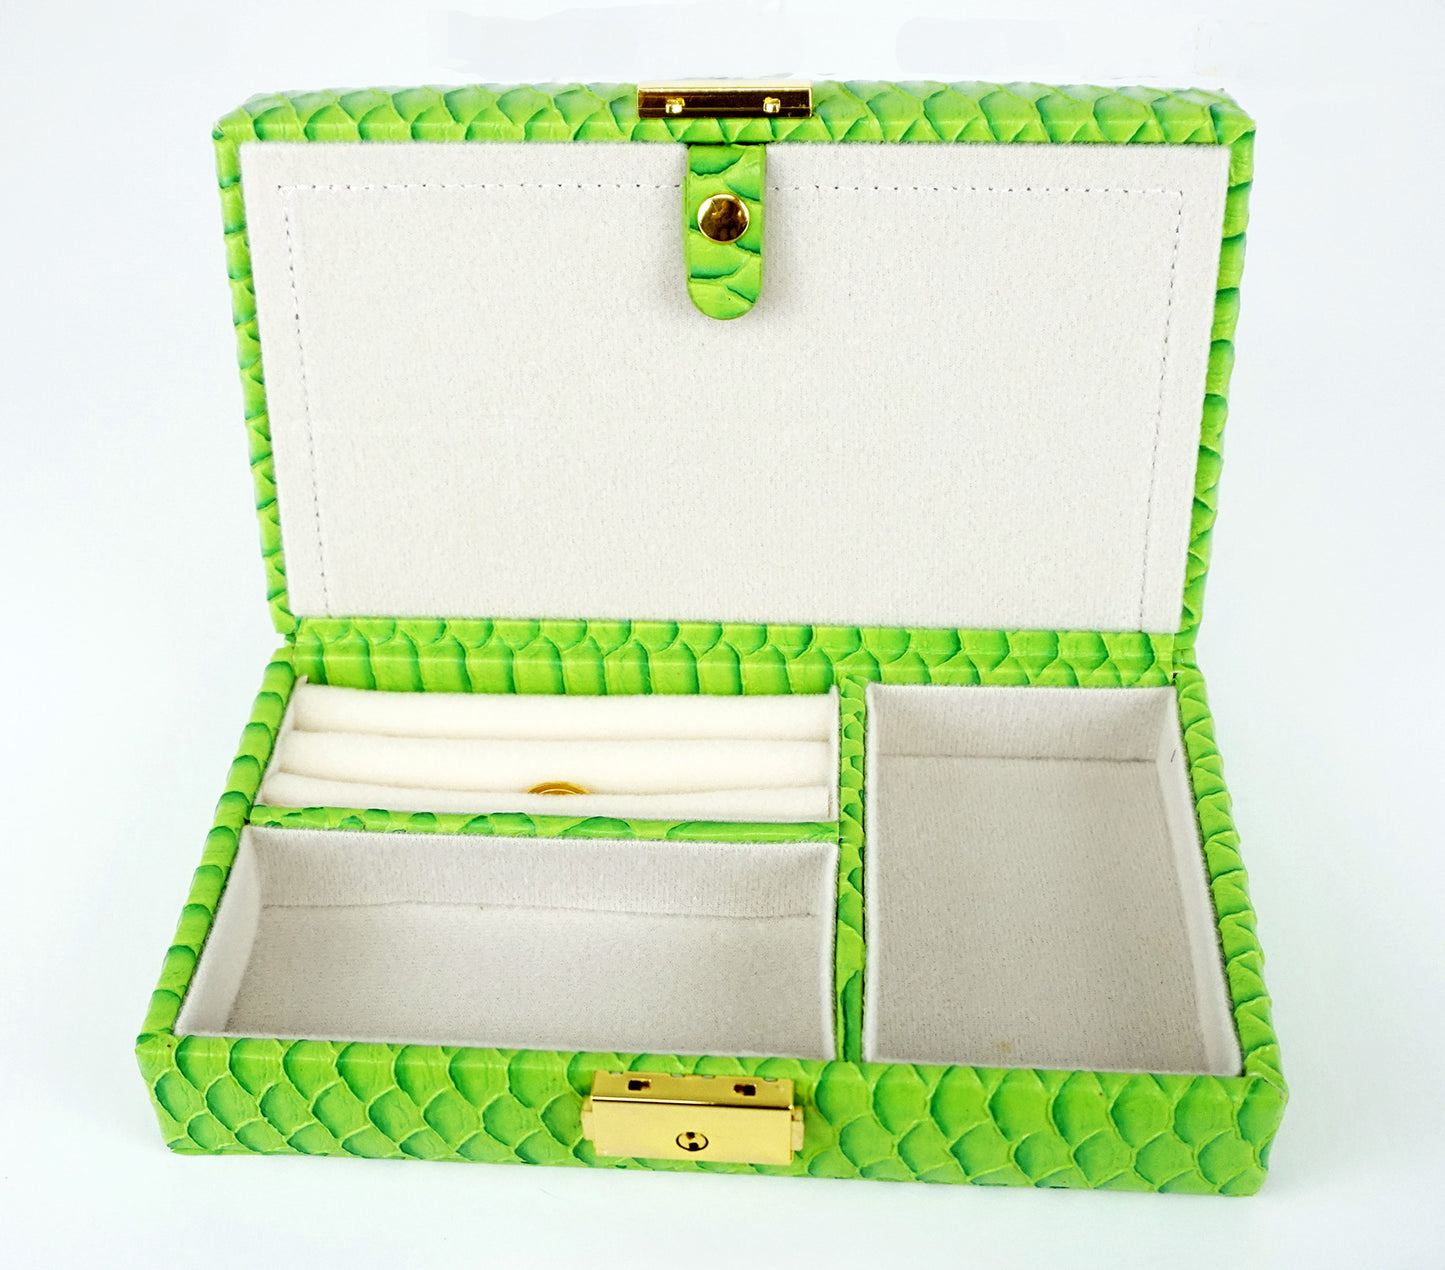 Leather Jewelry Box ~ Bright Green Leather Jewelry Box with Interior Compartments for Needlepoint Canvas by LEE